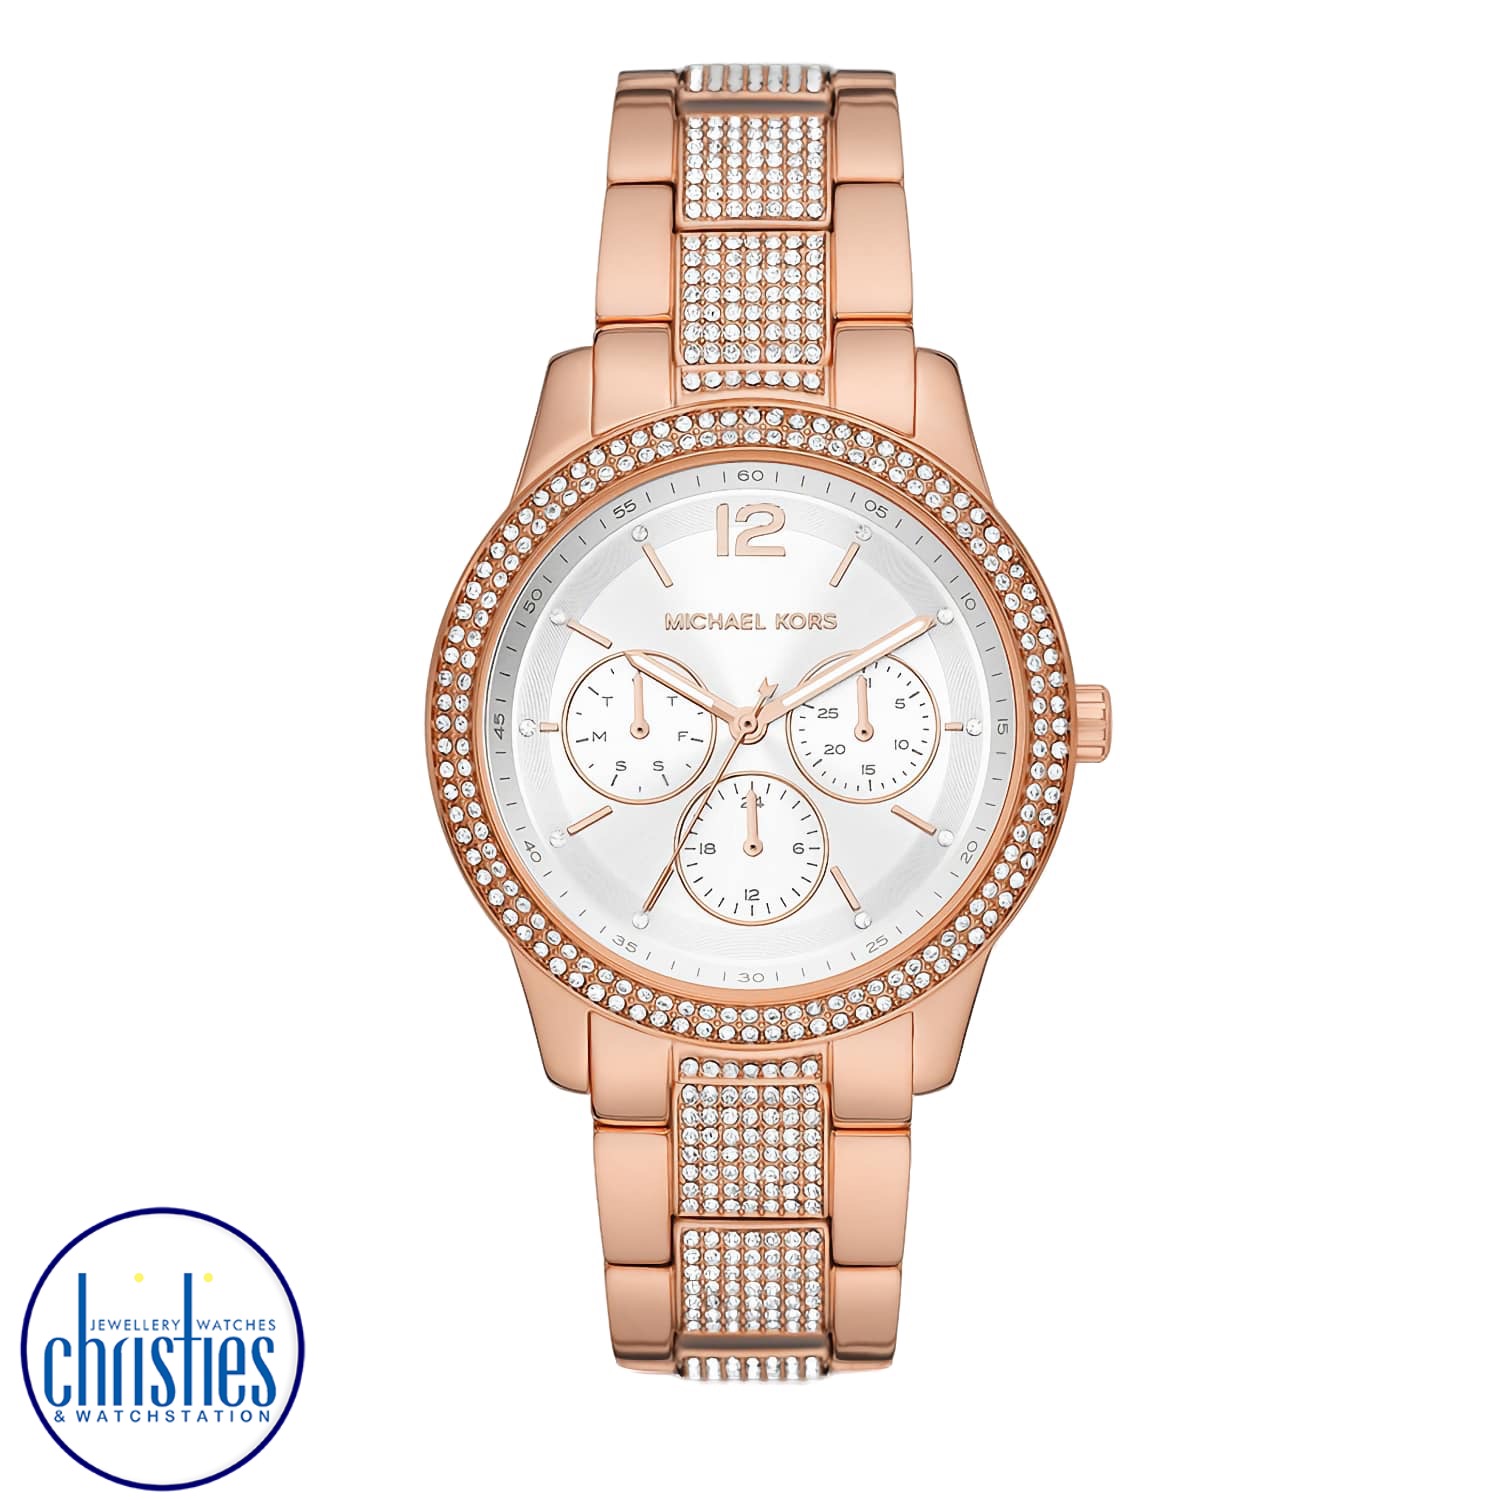 MK7293 Michael Kors Tibby Multifunction Rose Gold-Tone Stainless Steel Watch. MK7293 Michael Kors Tibby Multifunction Rose Gold-Tone Stainless Steel Watch Afterpay - Split your purchase into 4 instalments - Pay for your purchase over 4 instalments, due ev